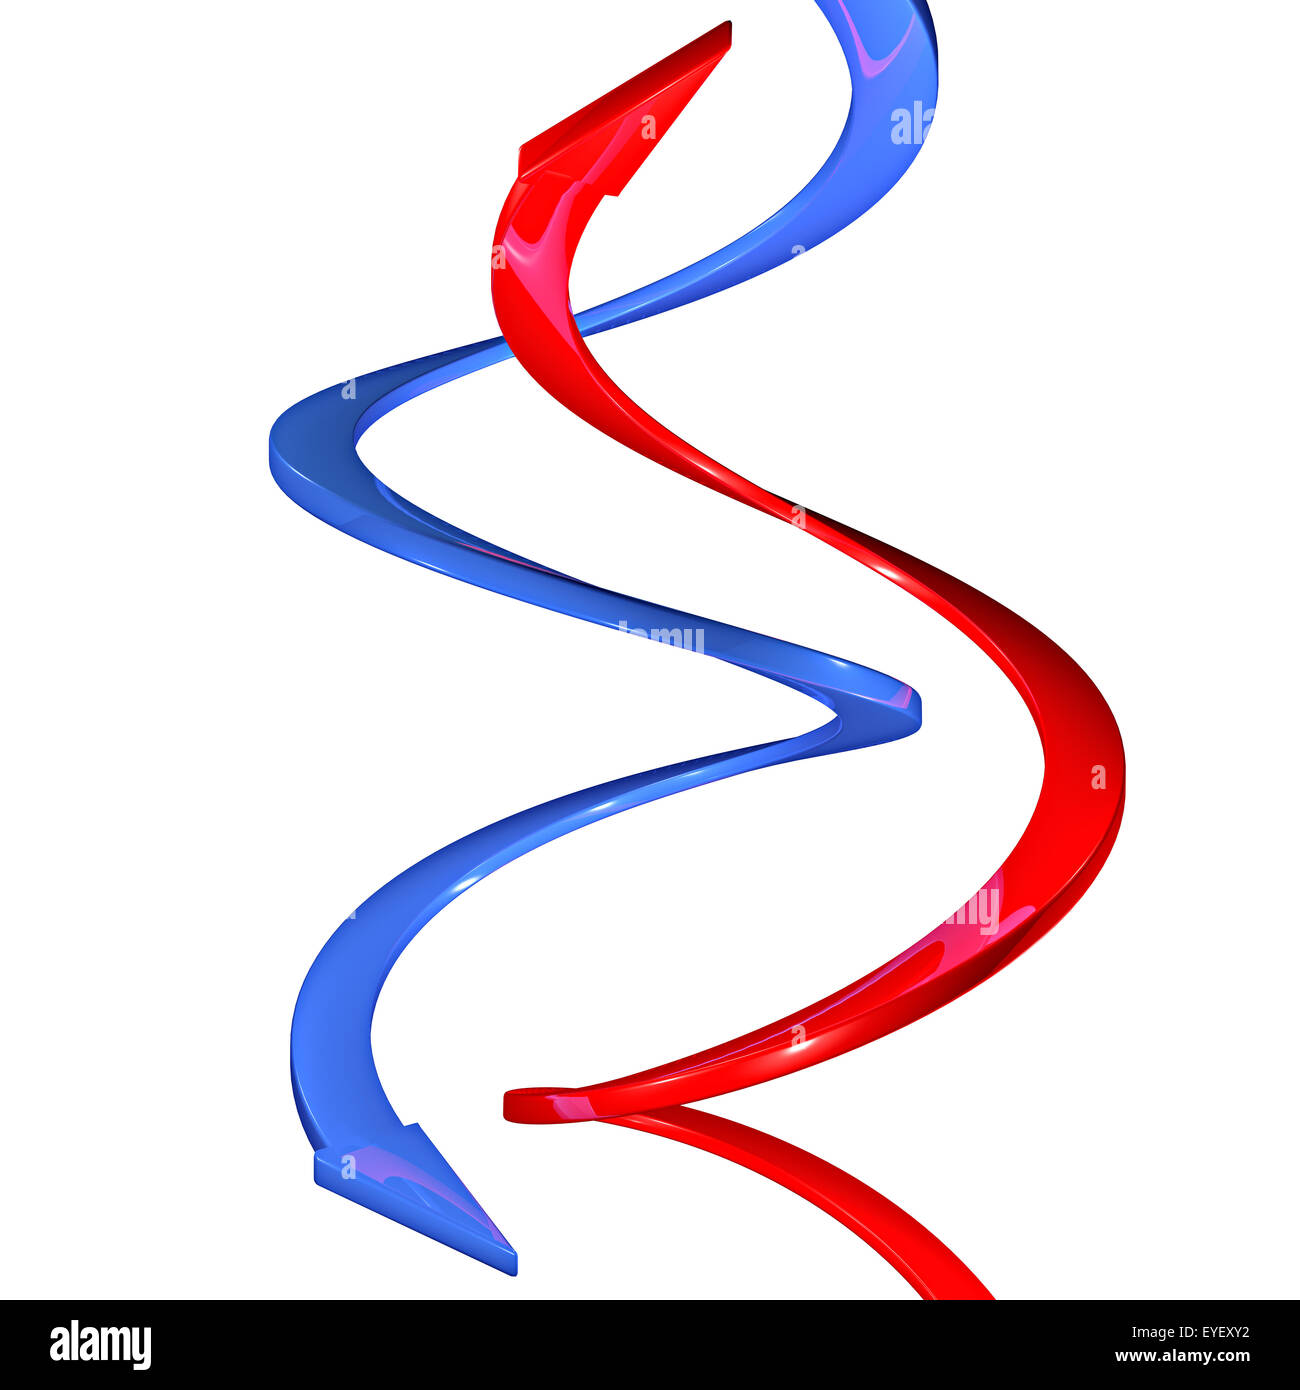 Blue arrows and red 3d spiral curves Stock Photo